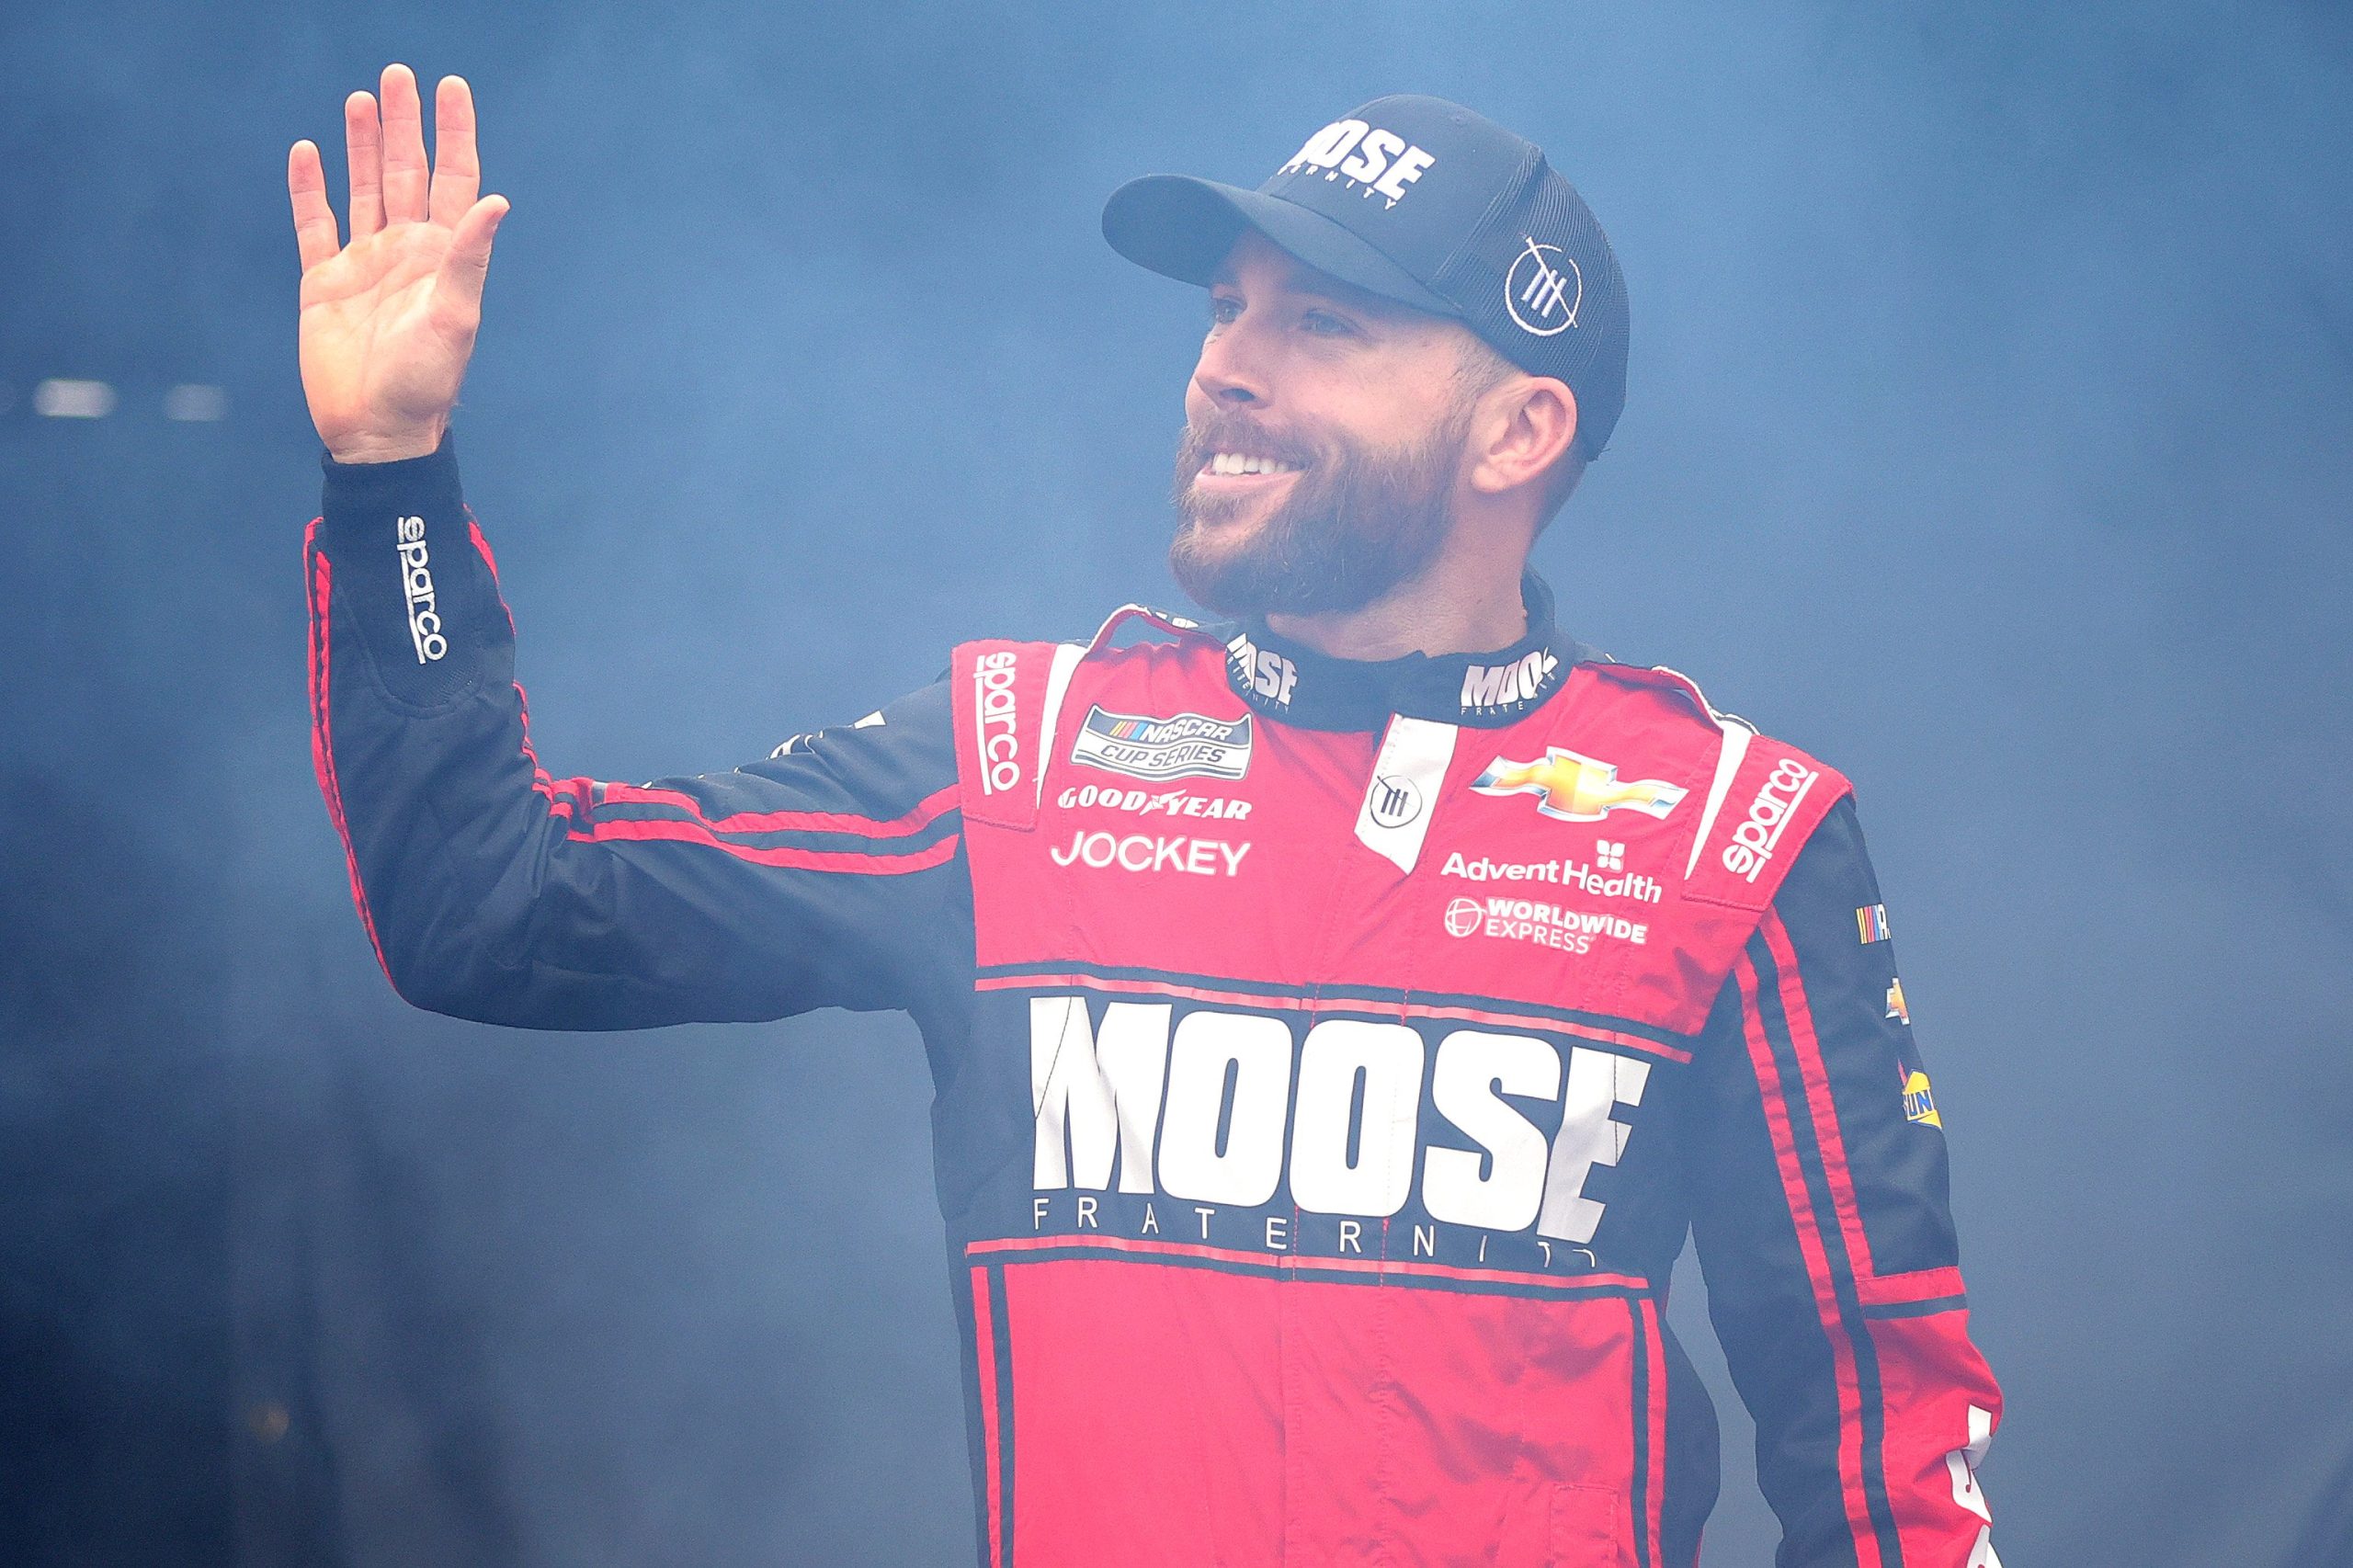 MARTINSVILLE, VIRGINIA - OCTOBER 30: Ross Chastain, driver of the #1 Moose Fraternity Chevrolet, waves to fans as he walks onstage during driver intros prior to the NASCAR Cup Series Xfinity 500 at Martinsville Speedway on October 30, 2022 in Martinsville, Virginia. (Photo by Stacy Revere/Getty Images)